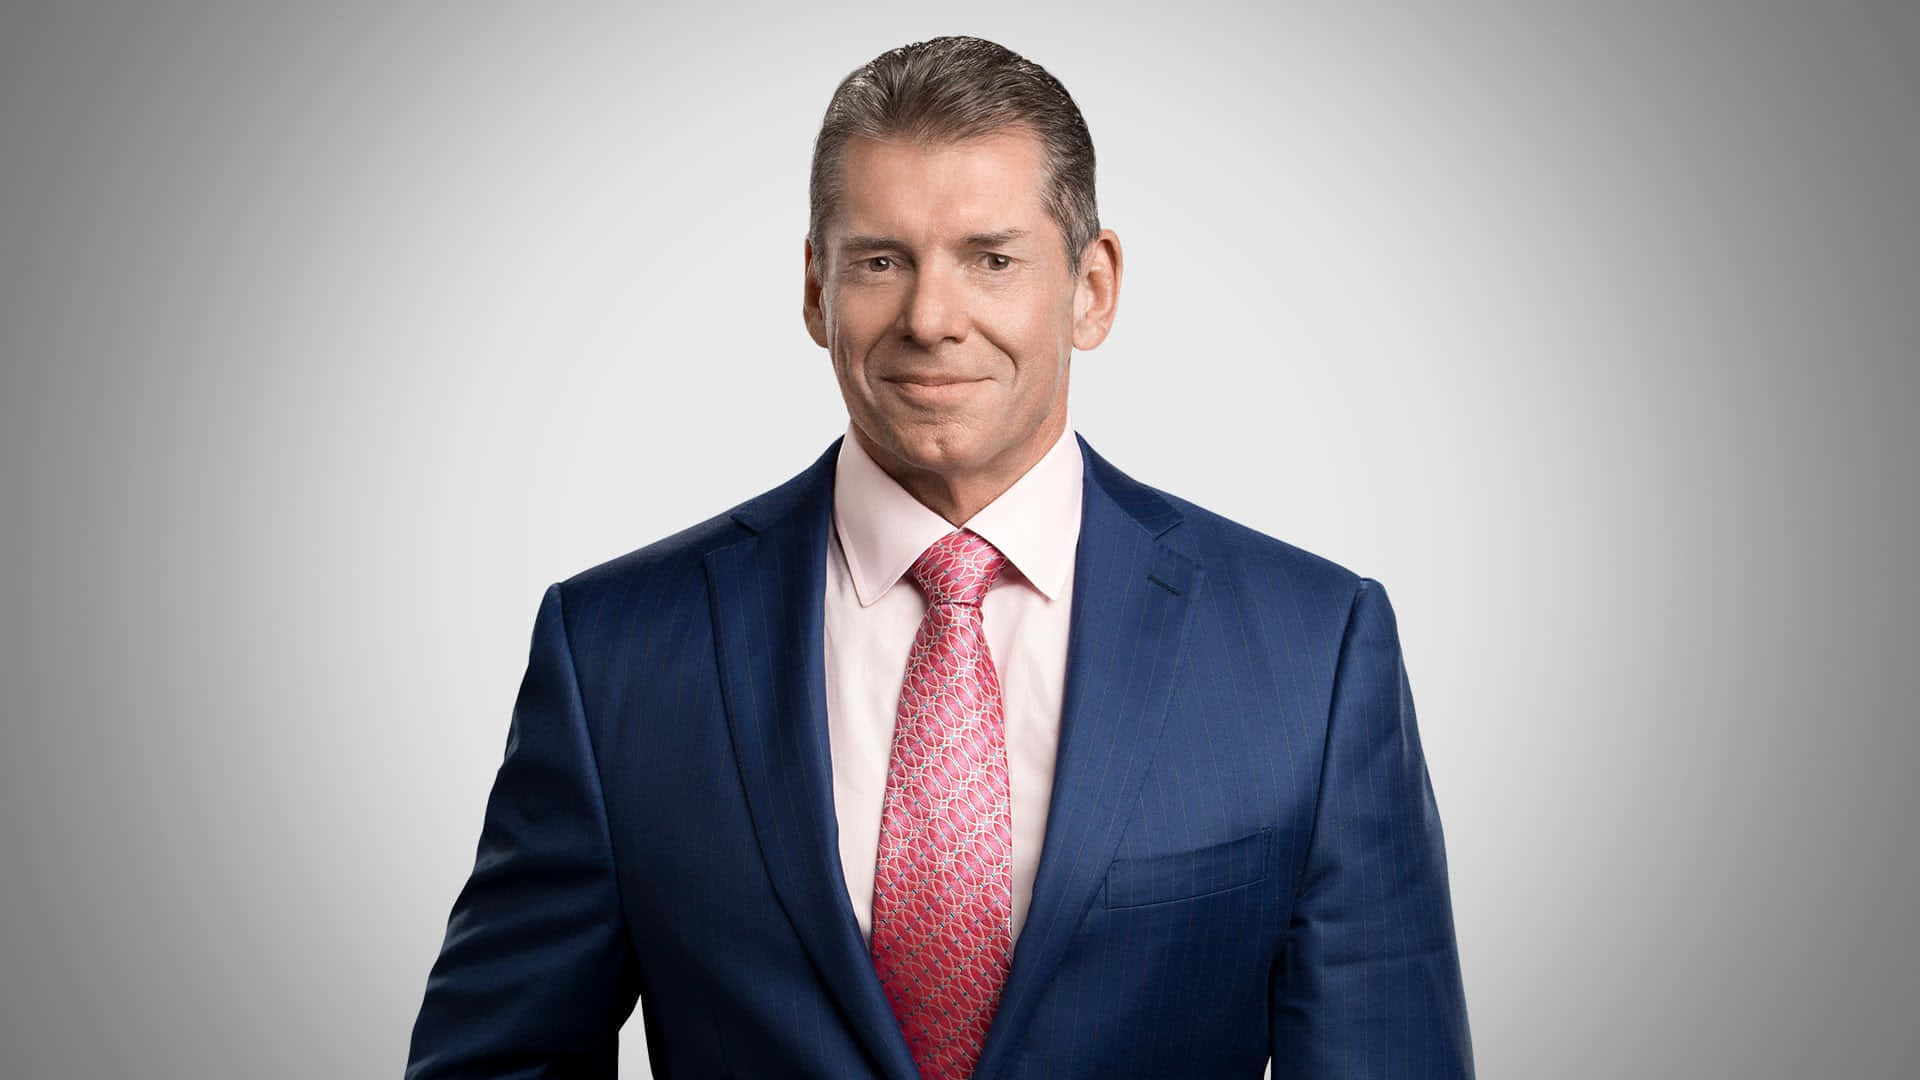 Wwe Ceo Vince Mcmahon Background